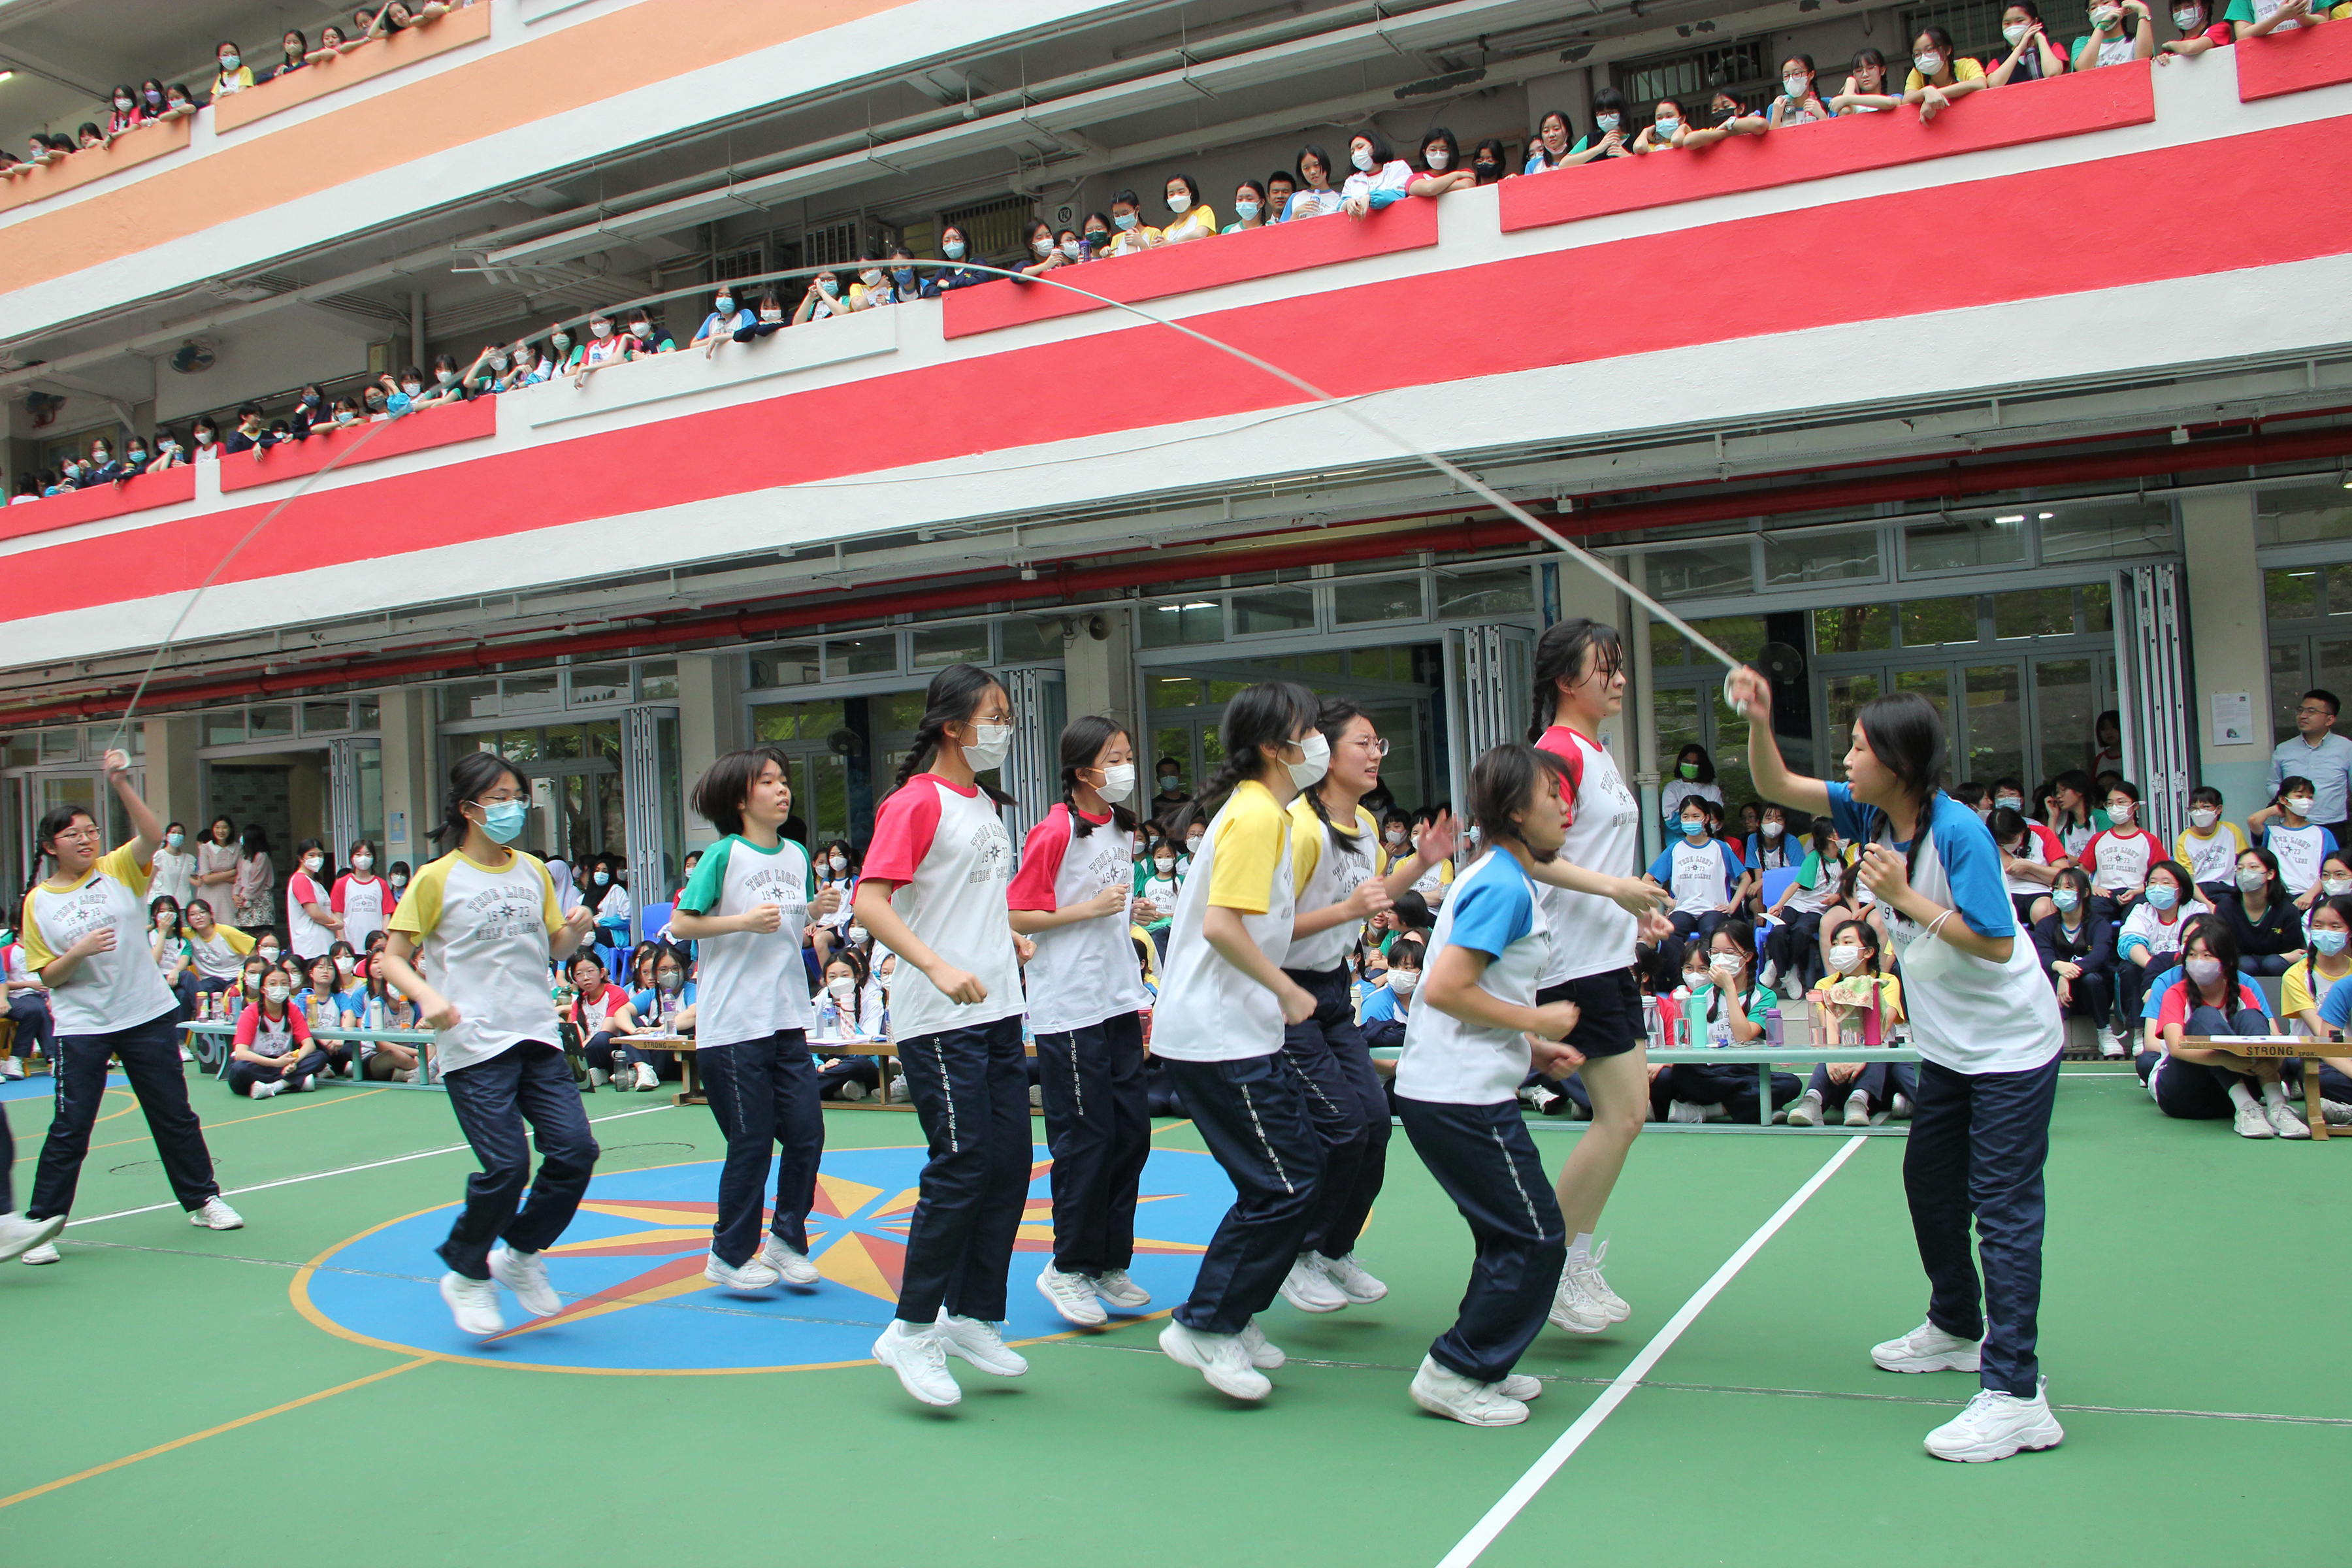 20230421 – Rope Skipping Competition